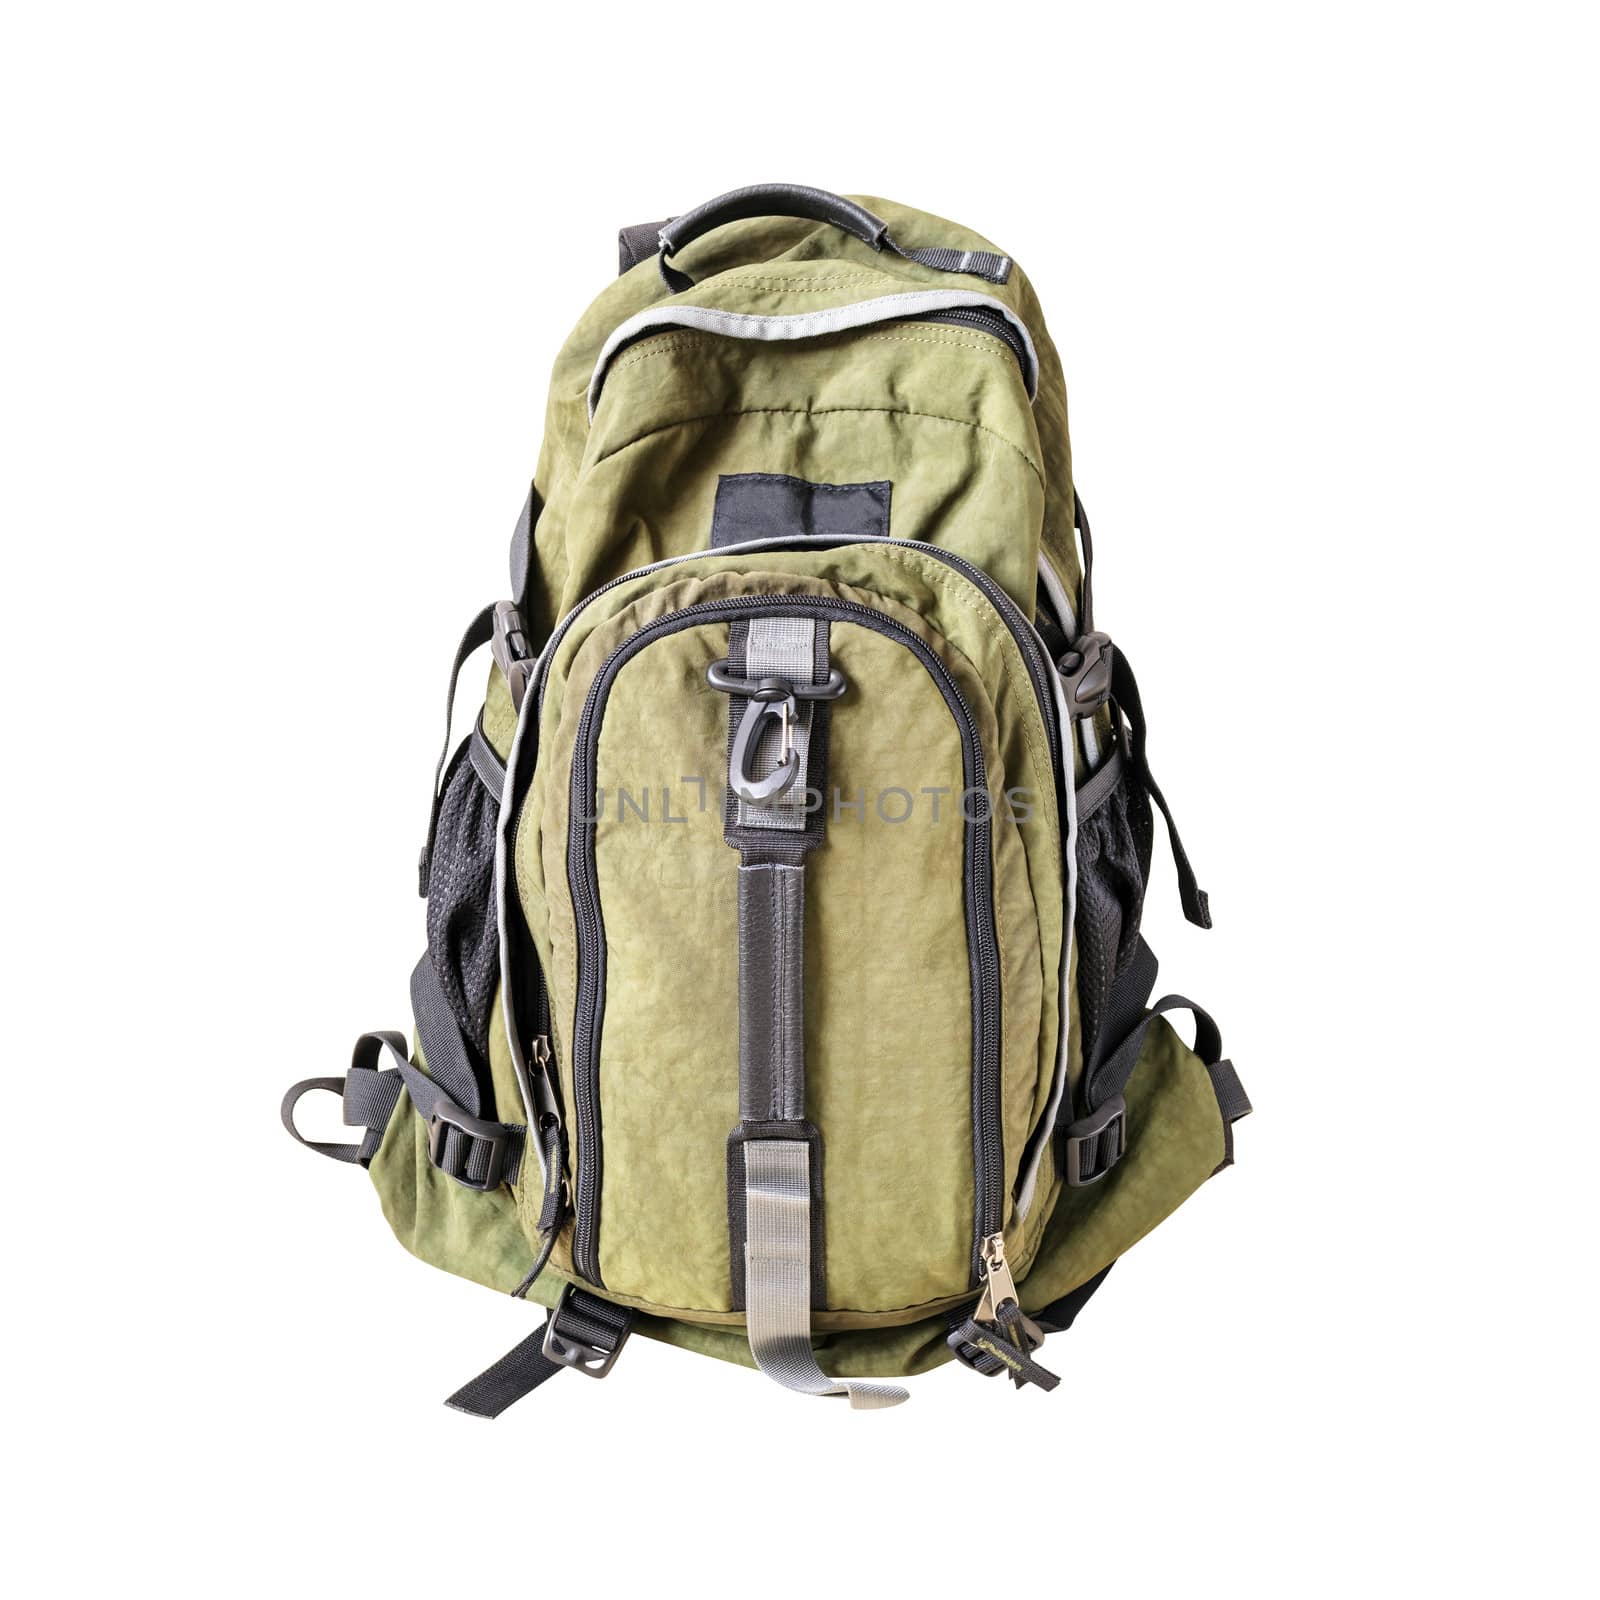 A high-resolution image of an isolated hacki-colored rucksack on white background. High-quality clipping path included.